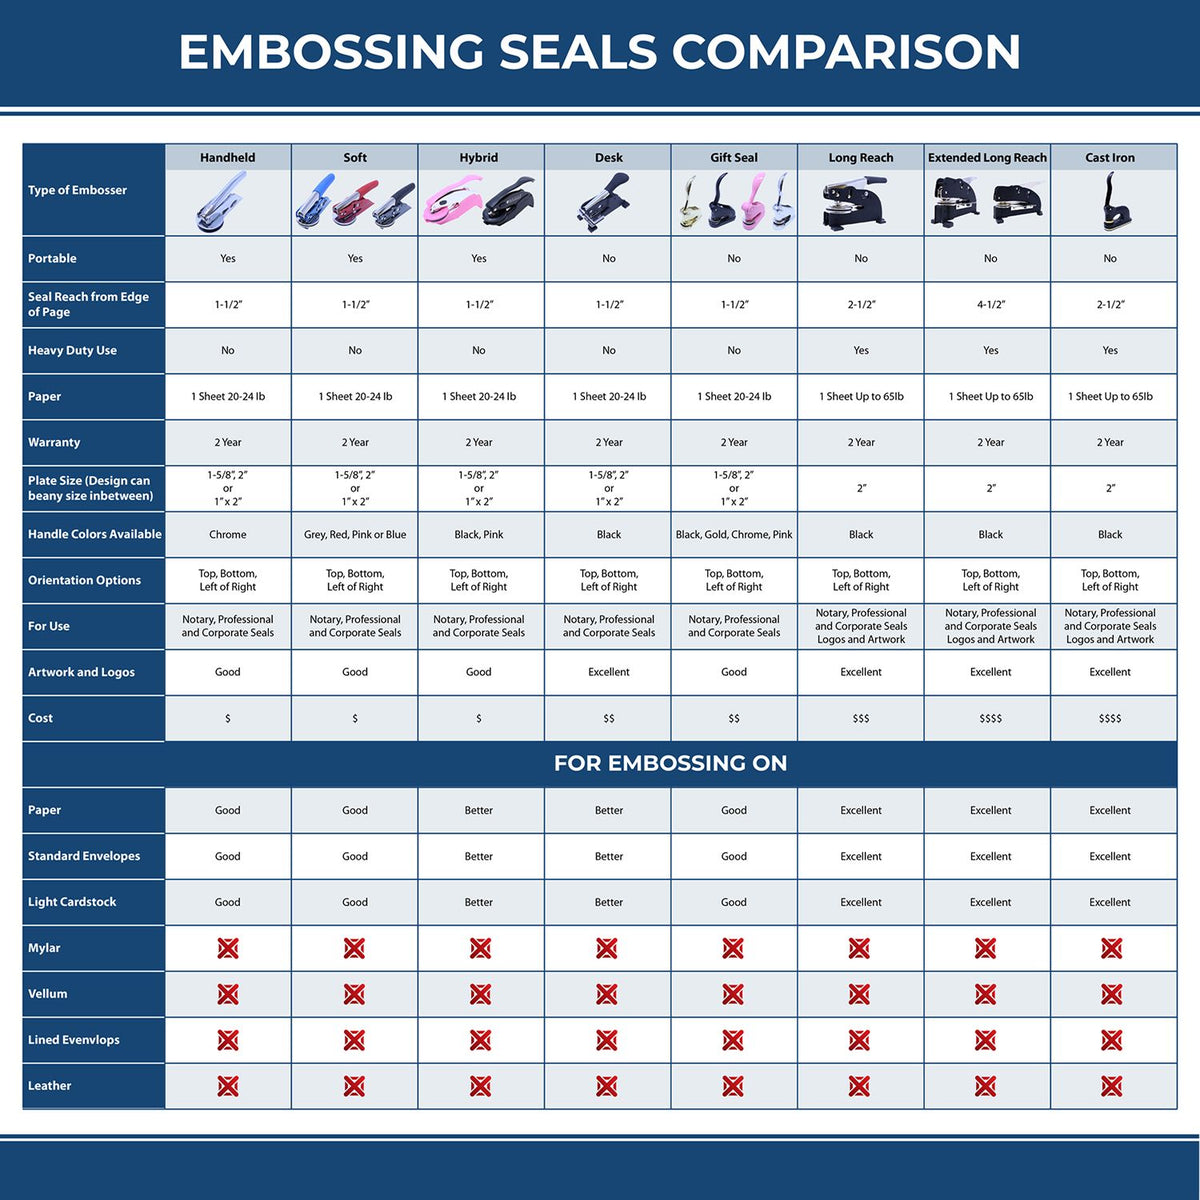 A comparison chart for the different types of mount models available for the District of Columbia Architectural Seal Embosser.